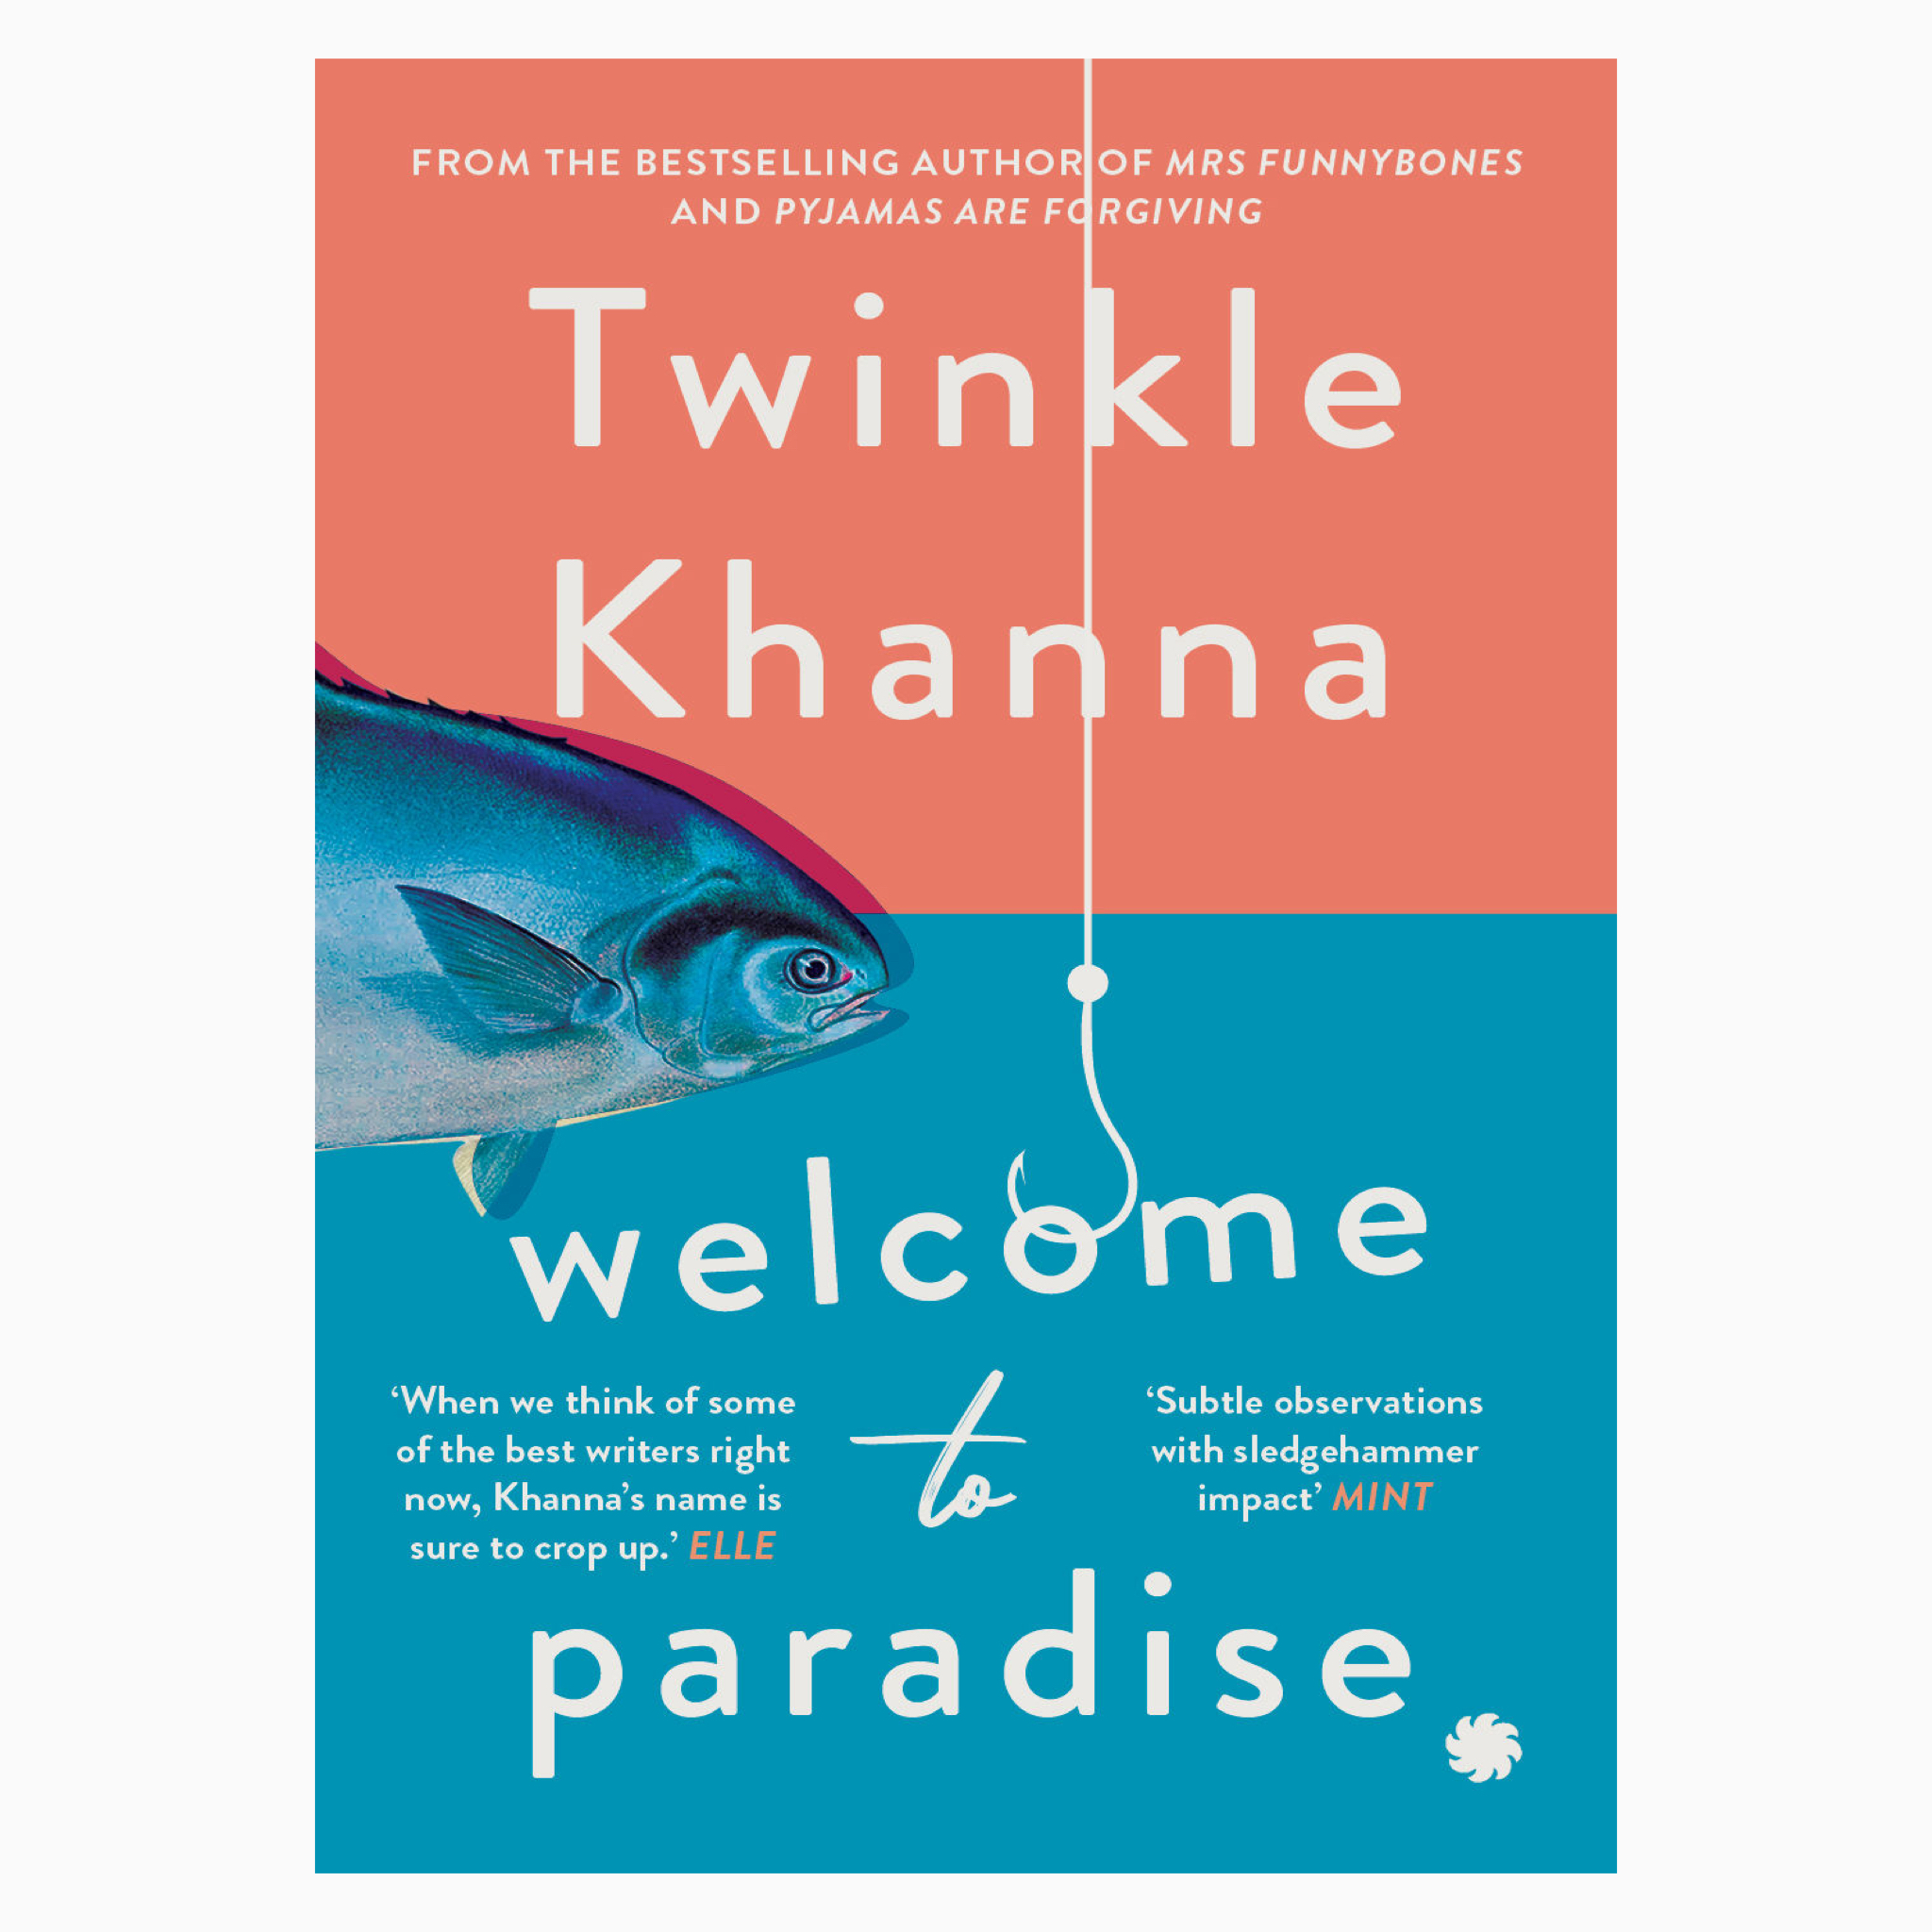 Welcome to Paradise by Twinkle Khanna